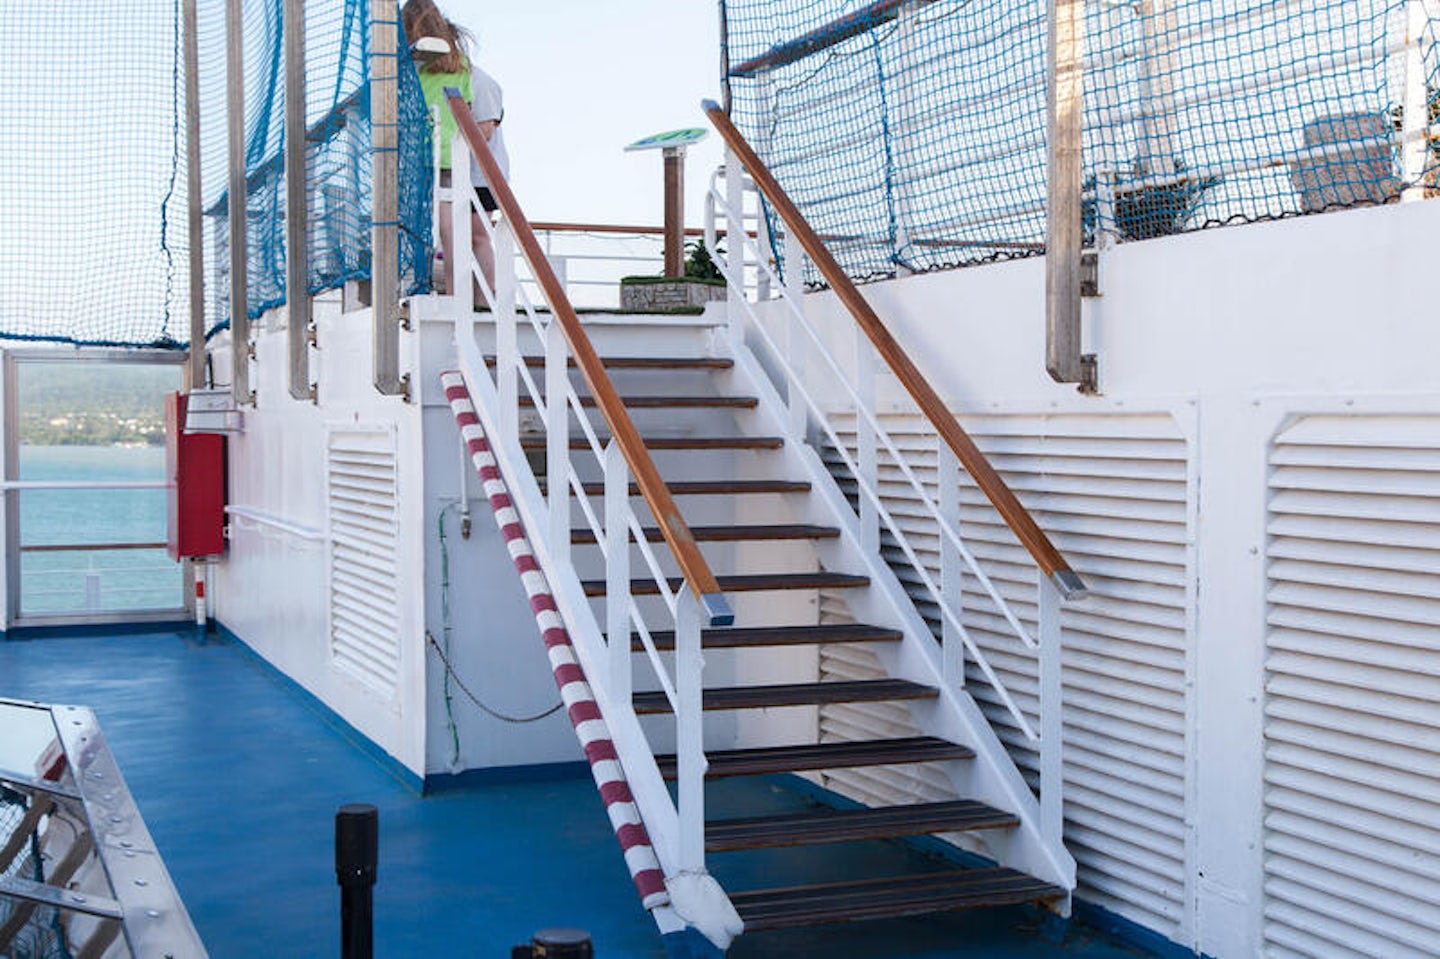 Sports Deck on Carnival Conquest